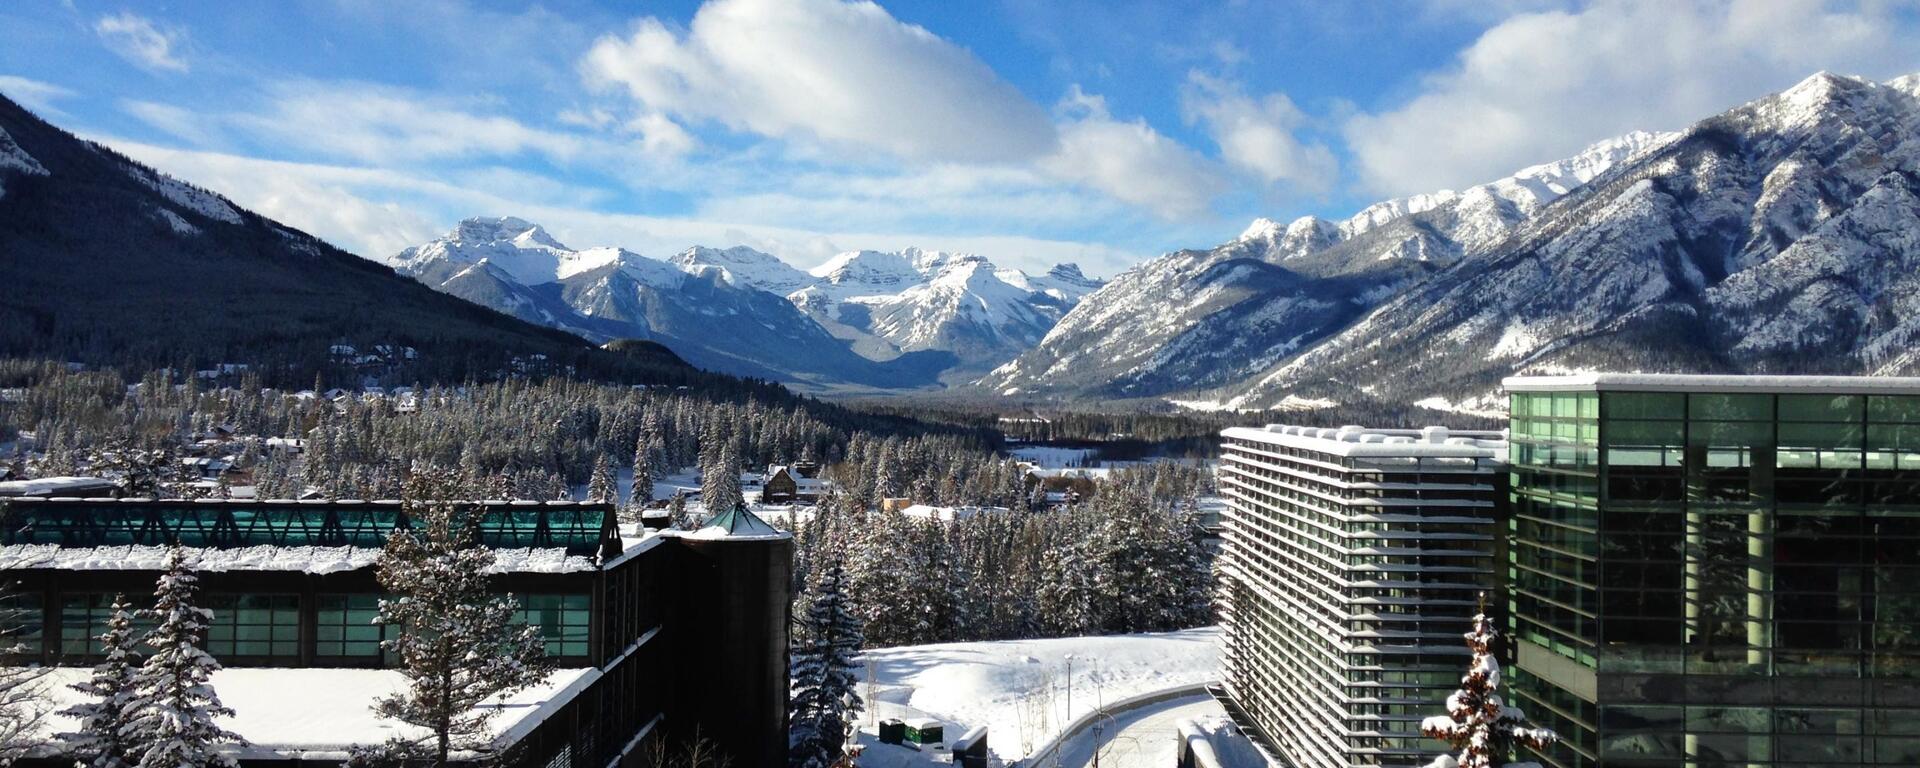 Banff Centre Campus and Mount Bourgeau